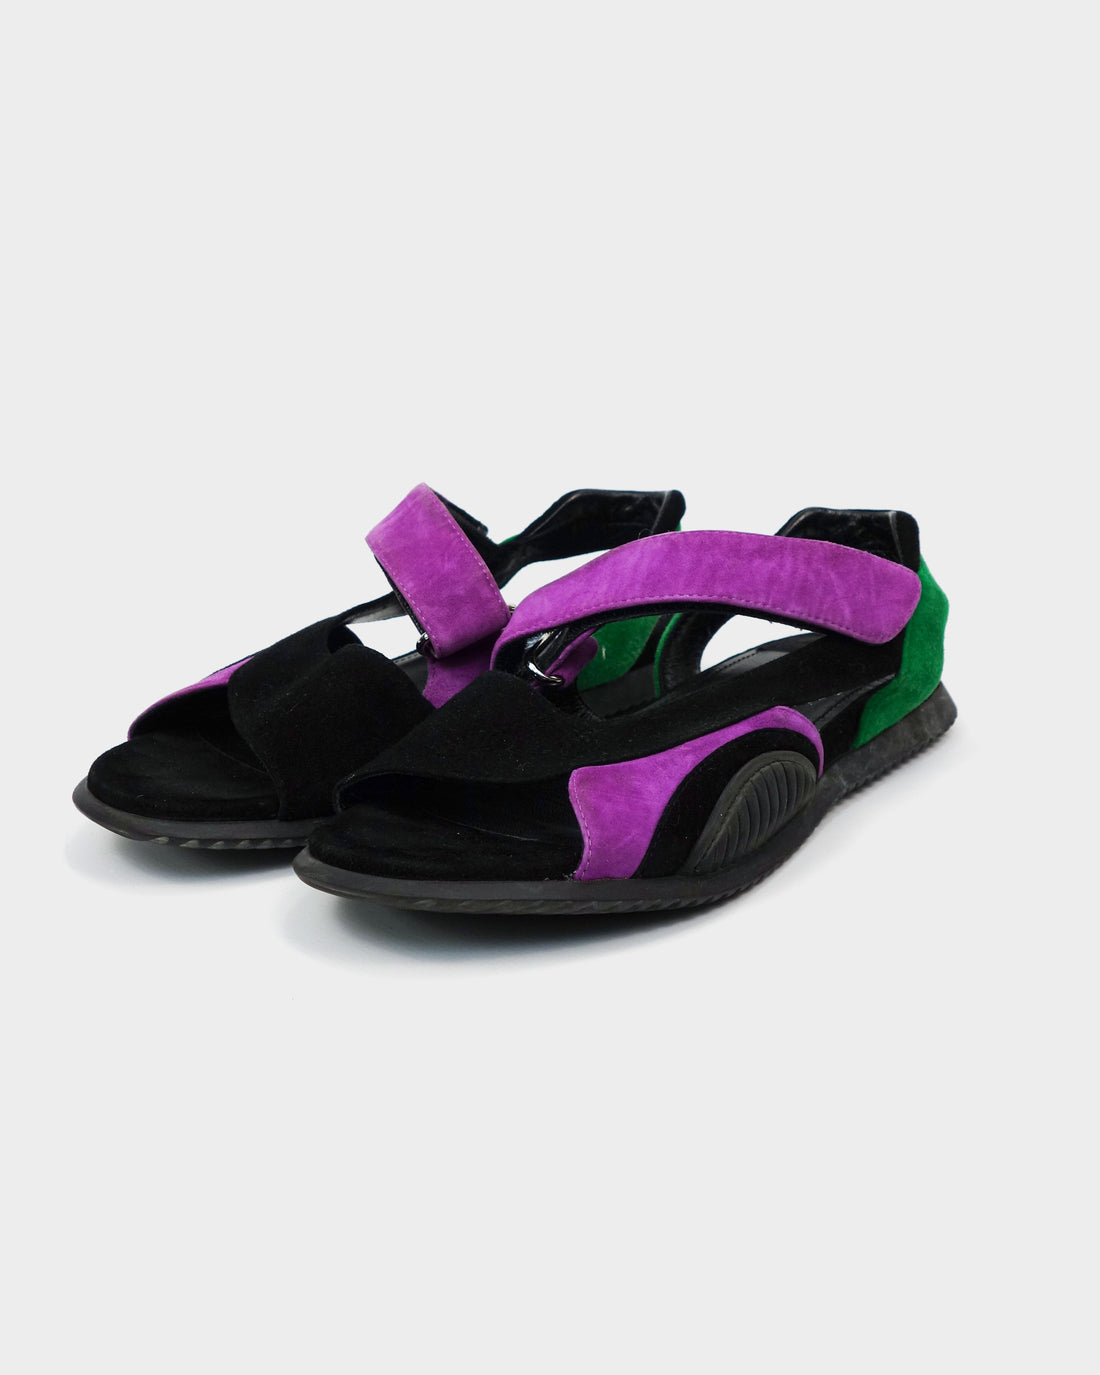 Prada Purple and Green Suede Sandals 1990's